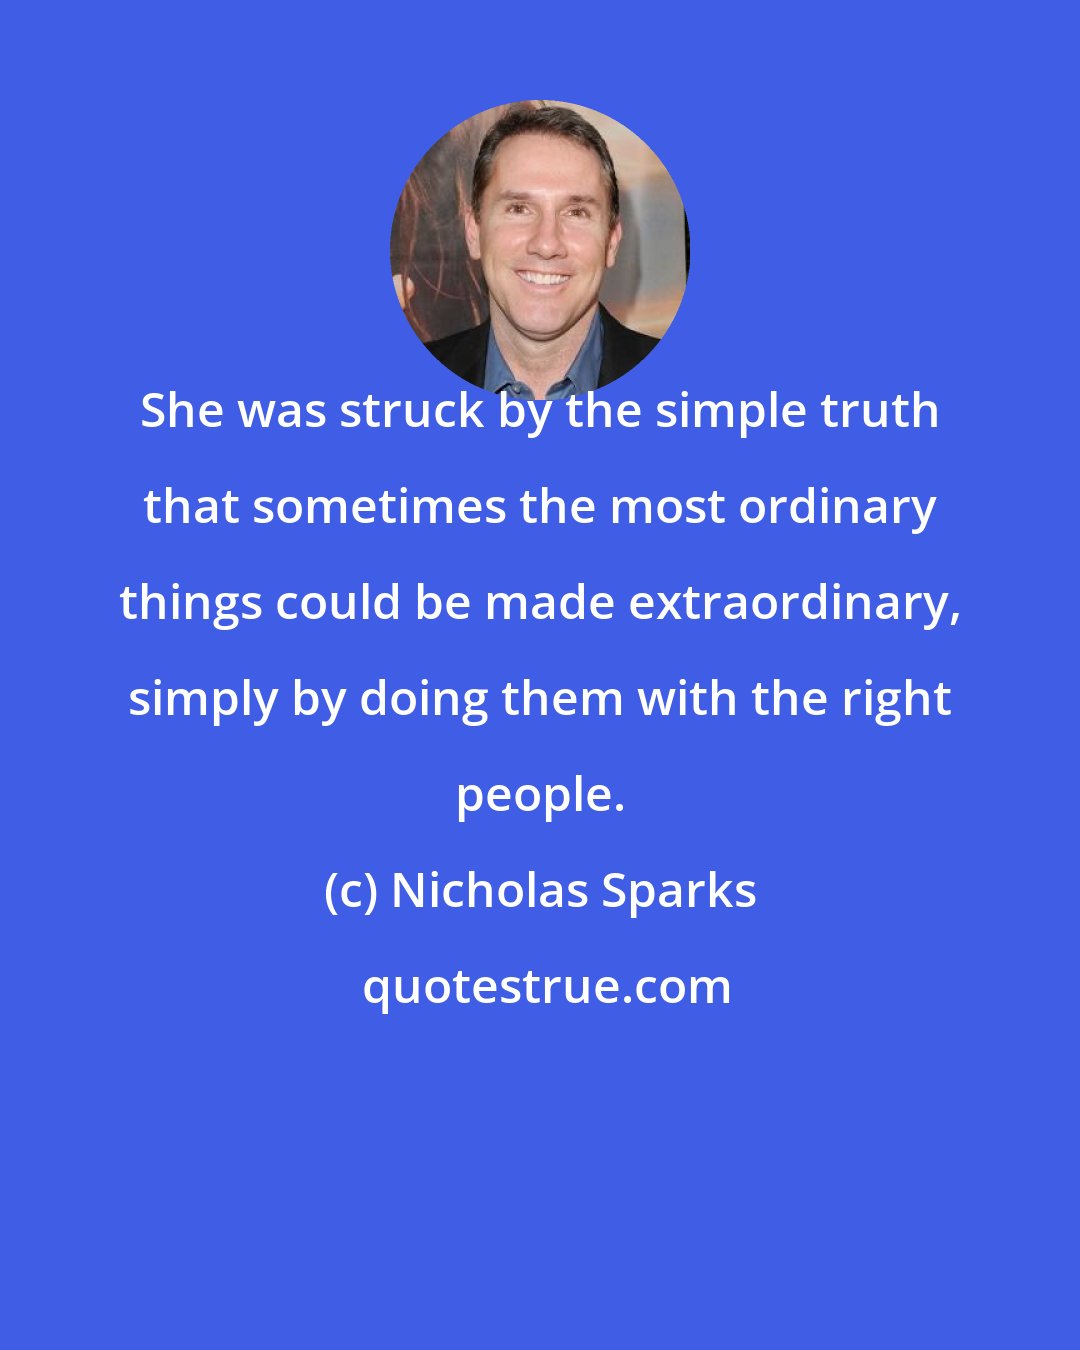 Nicholas Sparks: She was struck by the simple truth that sometimes the most ordinary things could be made extraordinary, simply by doing them with the right people.